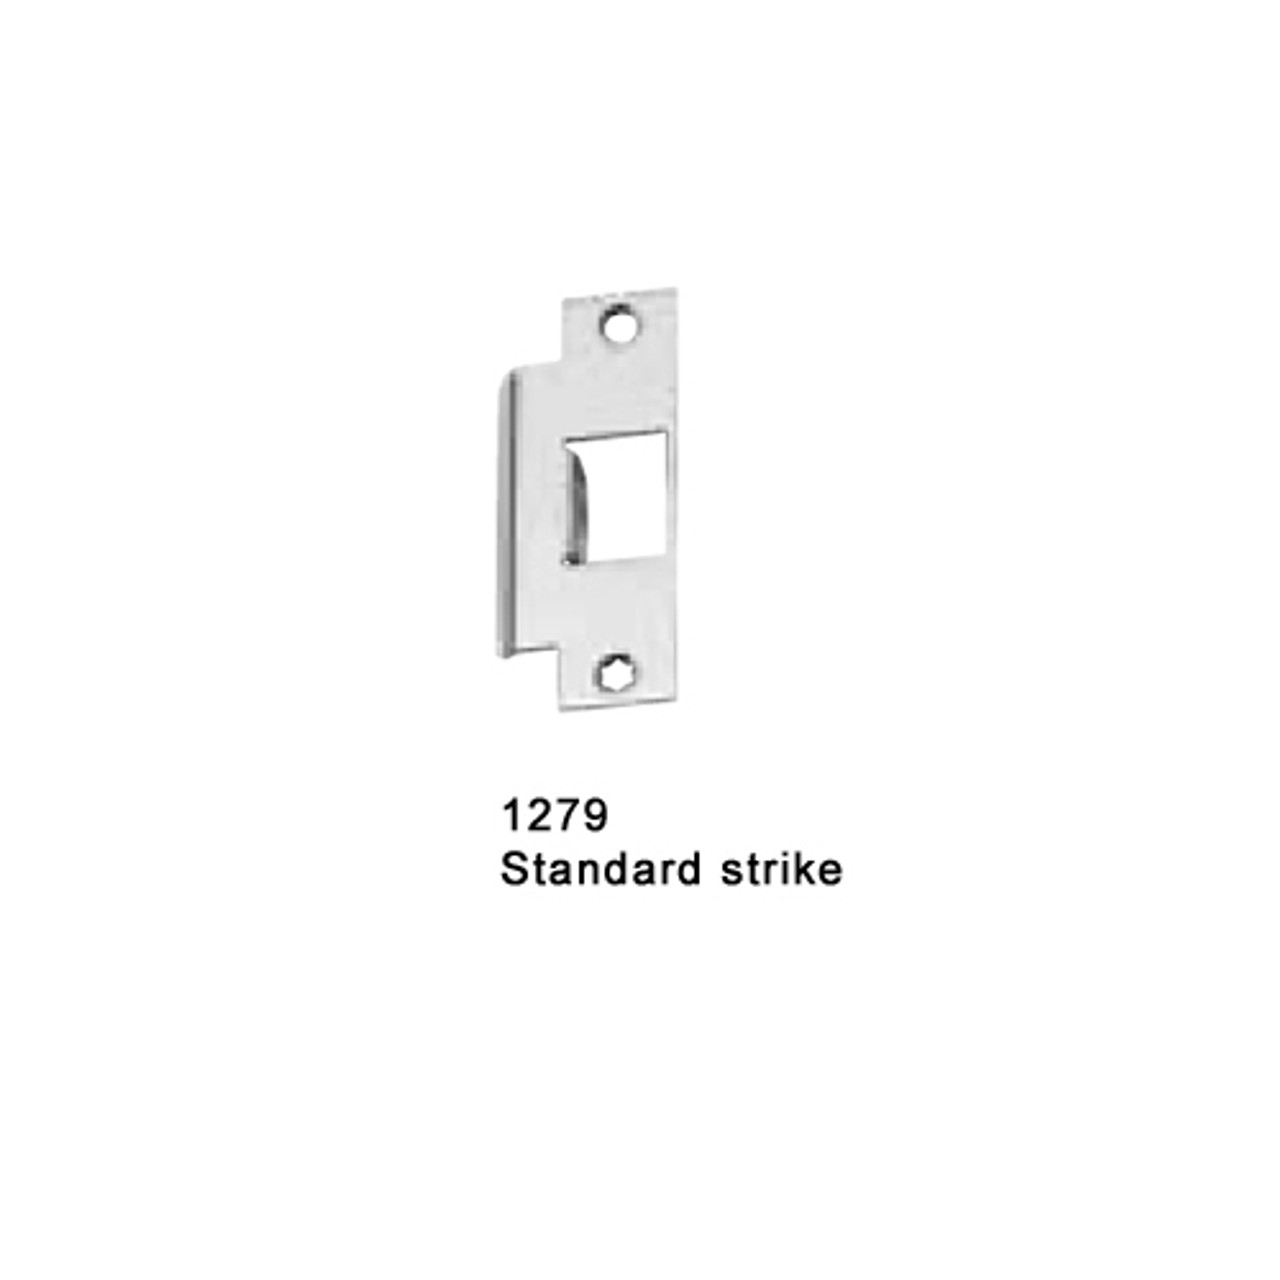 F-25-M-L-BE-Dane-US28-4-RHR Falcon 25 Series Fire Rated Mortise Lock Devices 510L-BE Dane Lever Trim with Blank Escutcheon in Anodized Aluminum